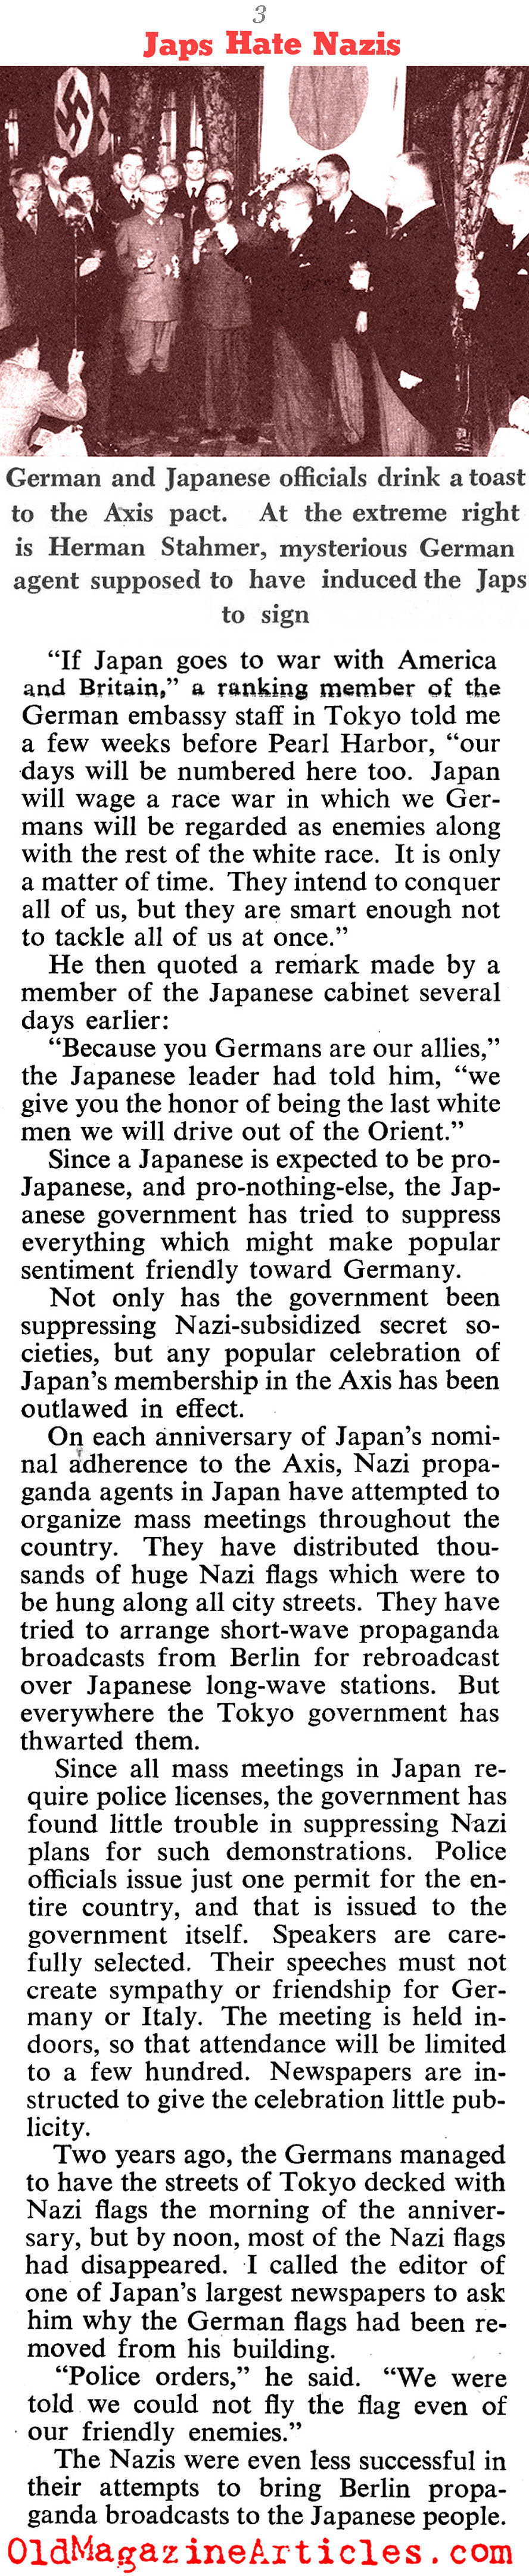 The Japanese Did Not Like The Germans (Collier's Magazine, 1943)